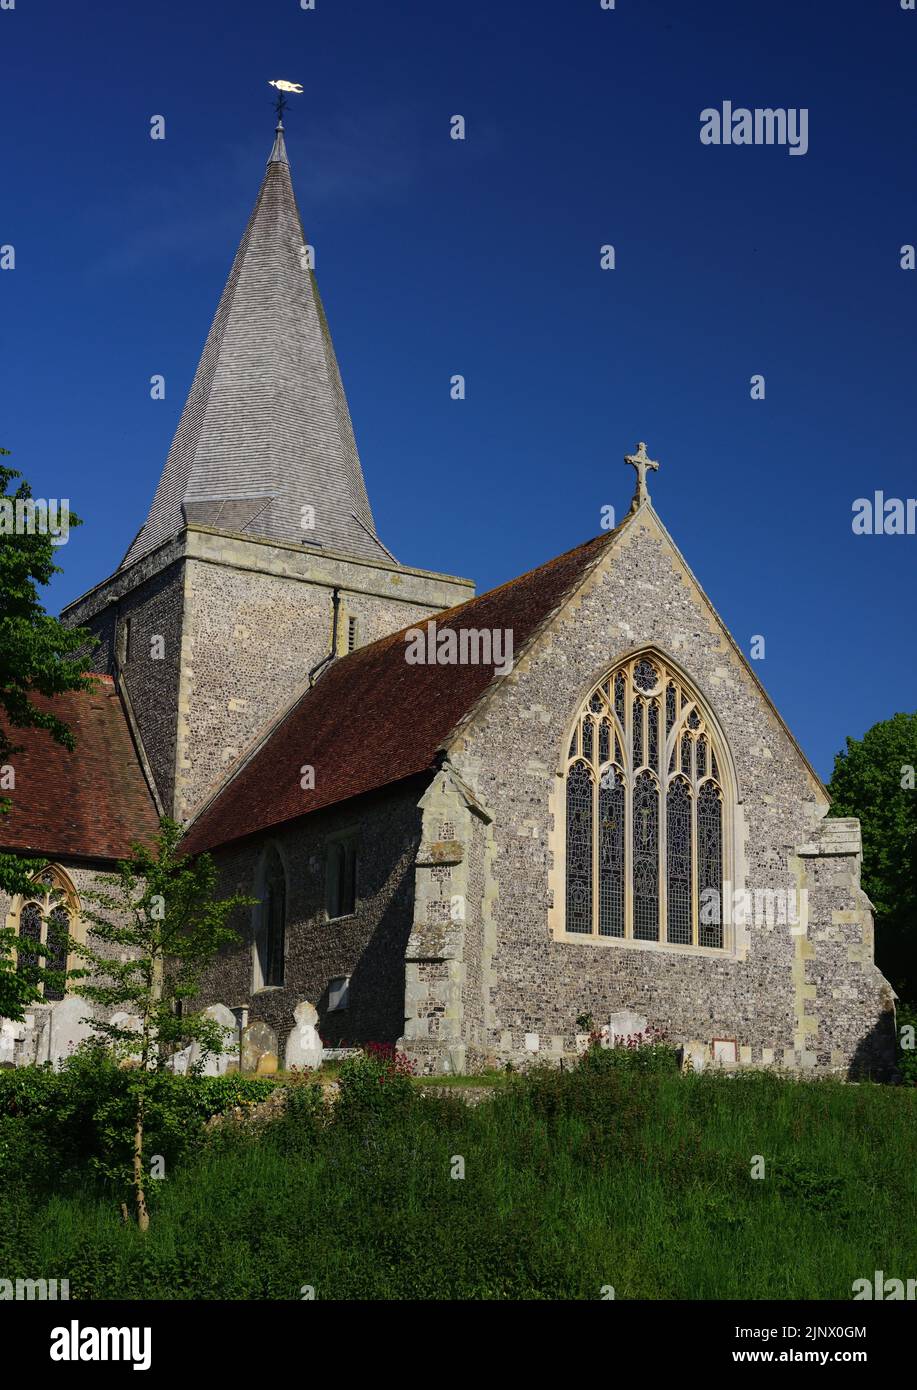 St Andrew's church, Alfriston, East Sussex. Stock Photo